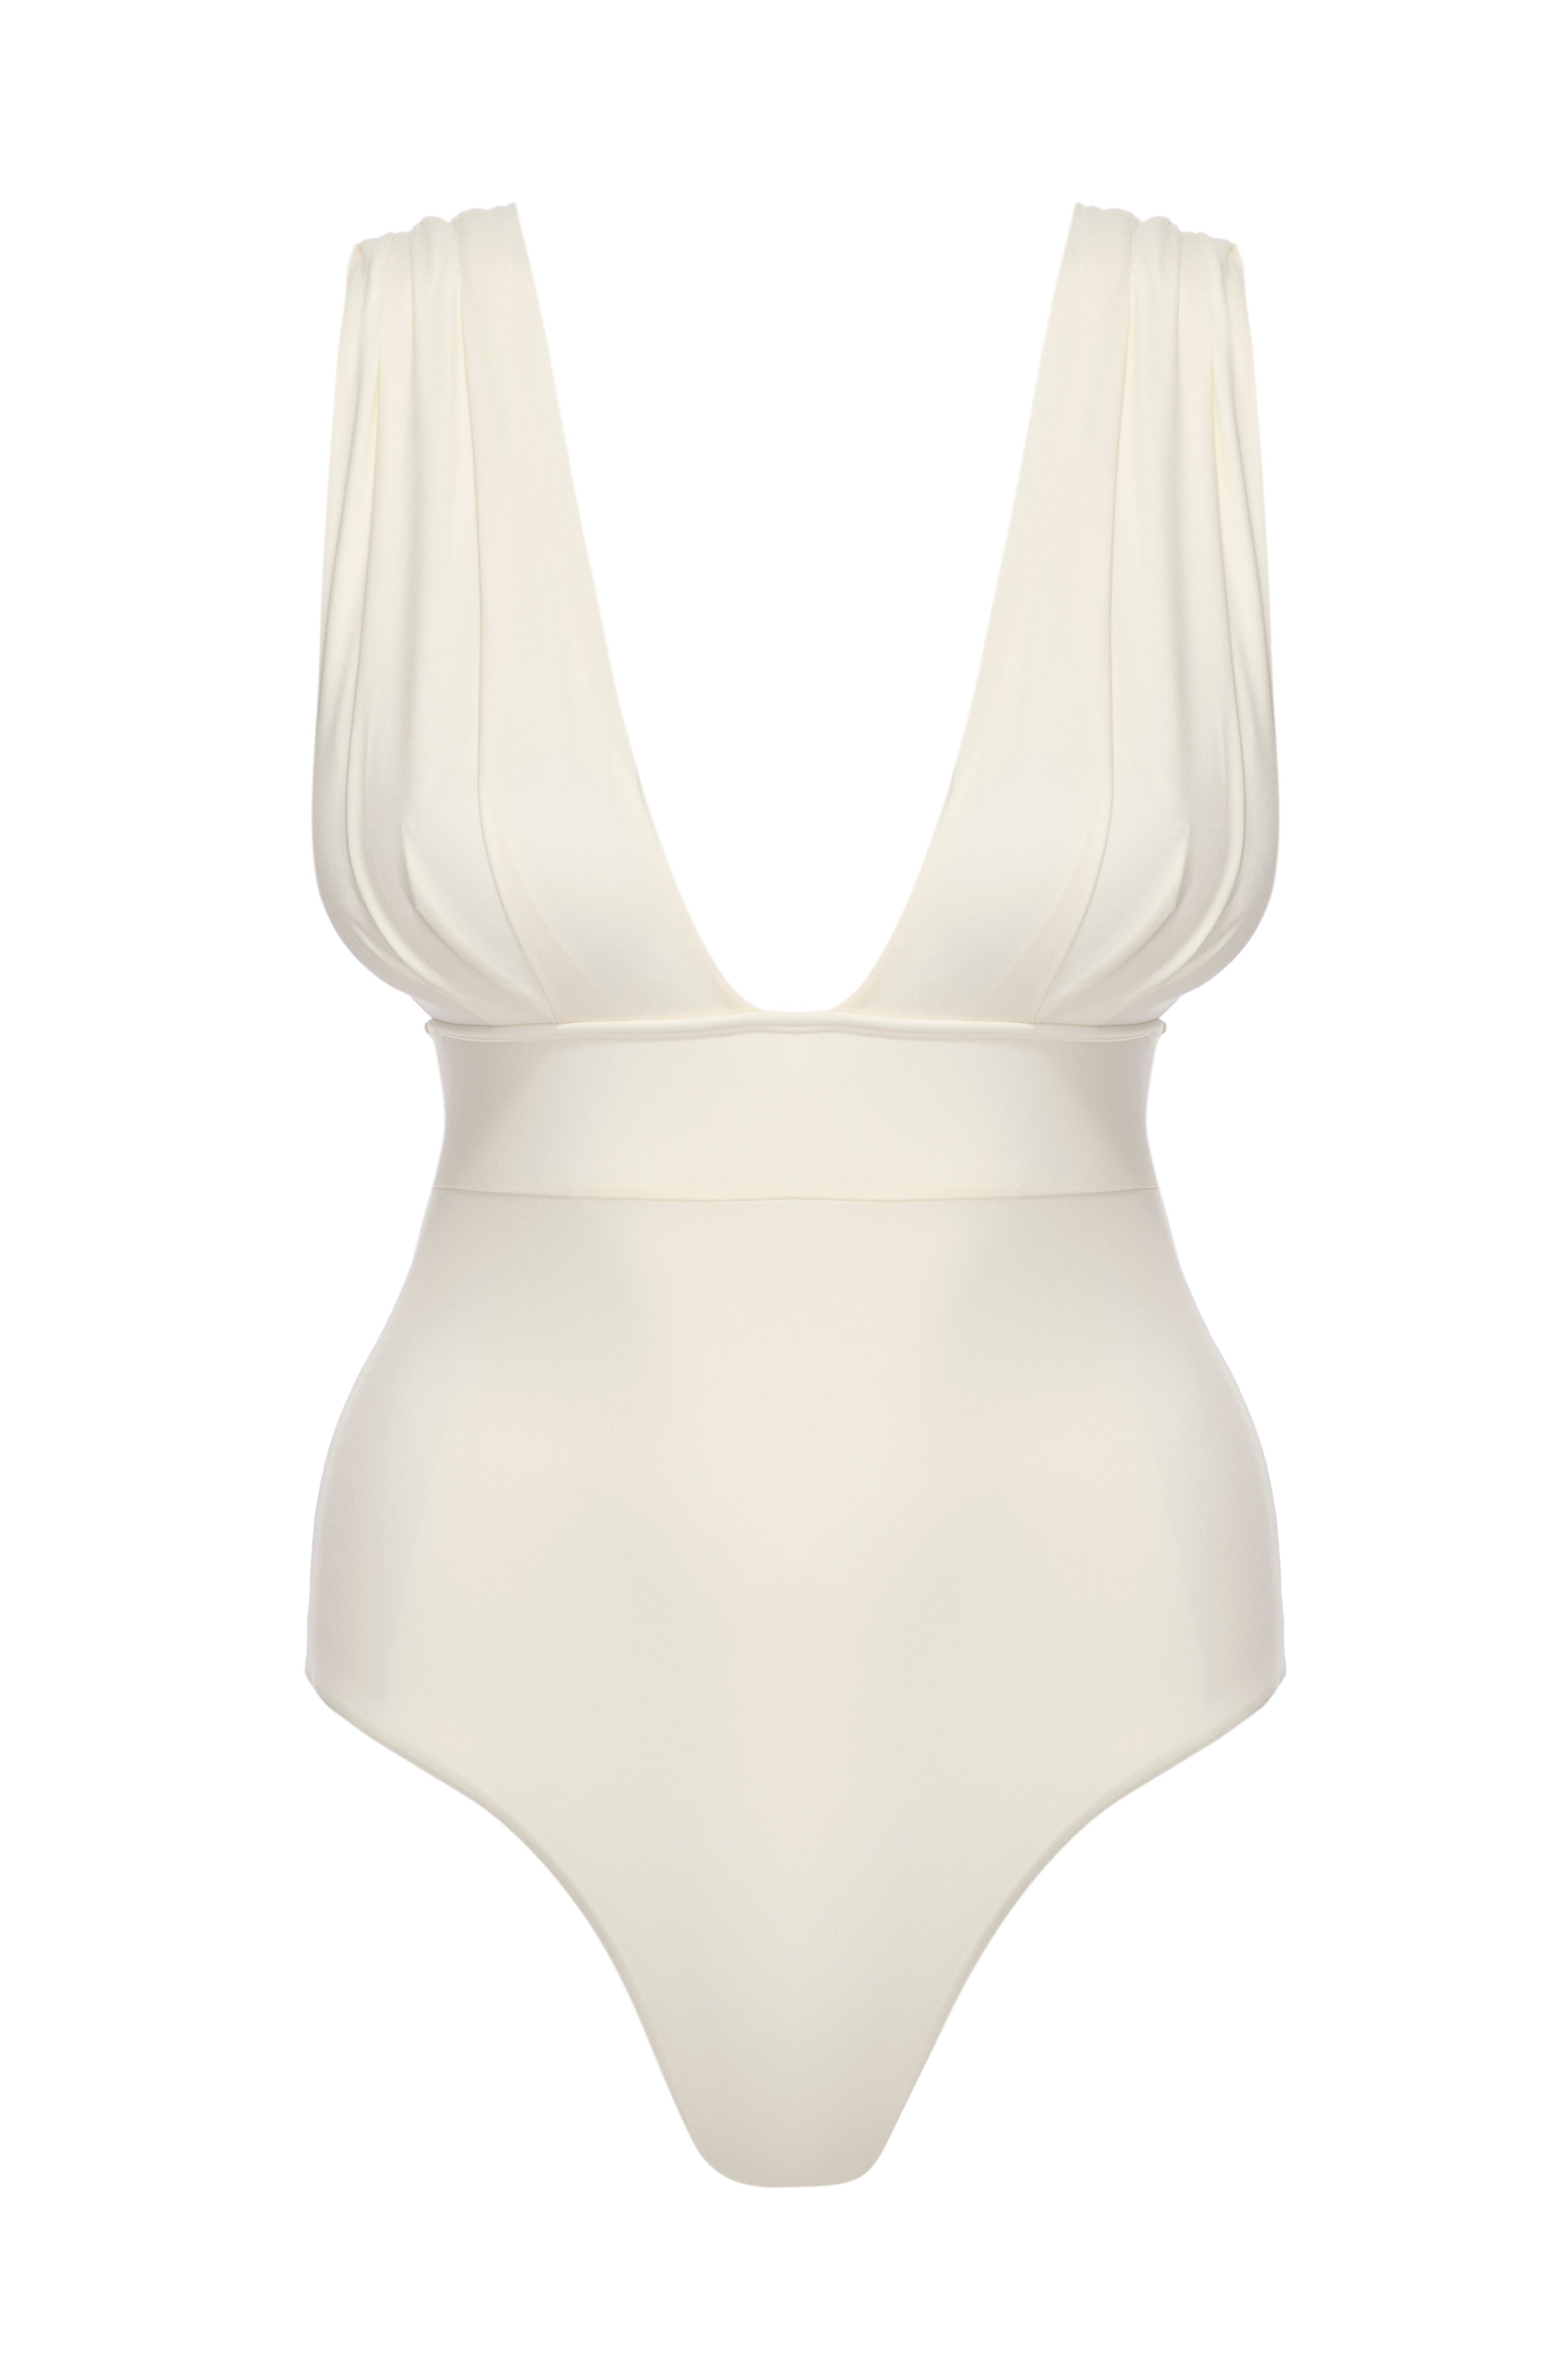 Modern Maternity Swimsuit One Piece With Side Tie Closure